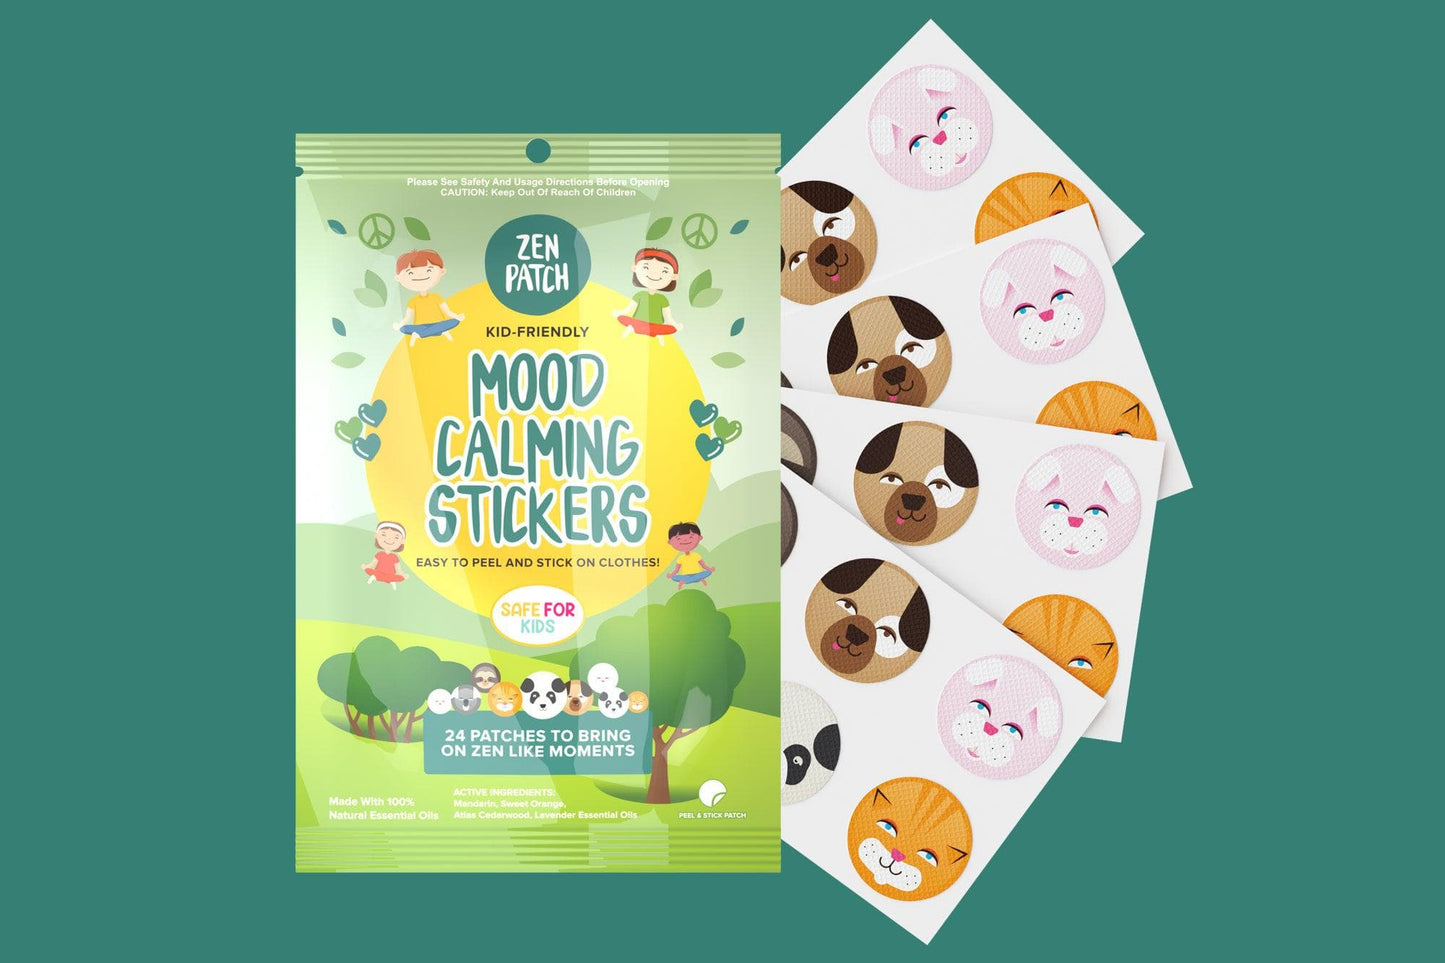 30 x ZenPatch Mood Calming Stickers individual resale packets in a Retail Display Box